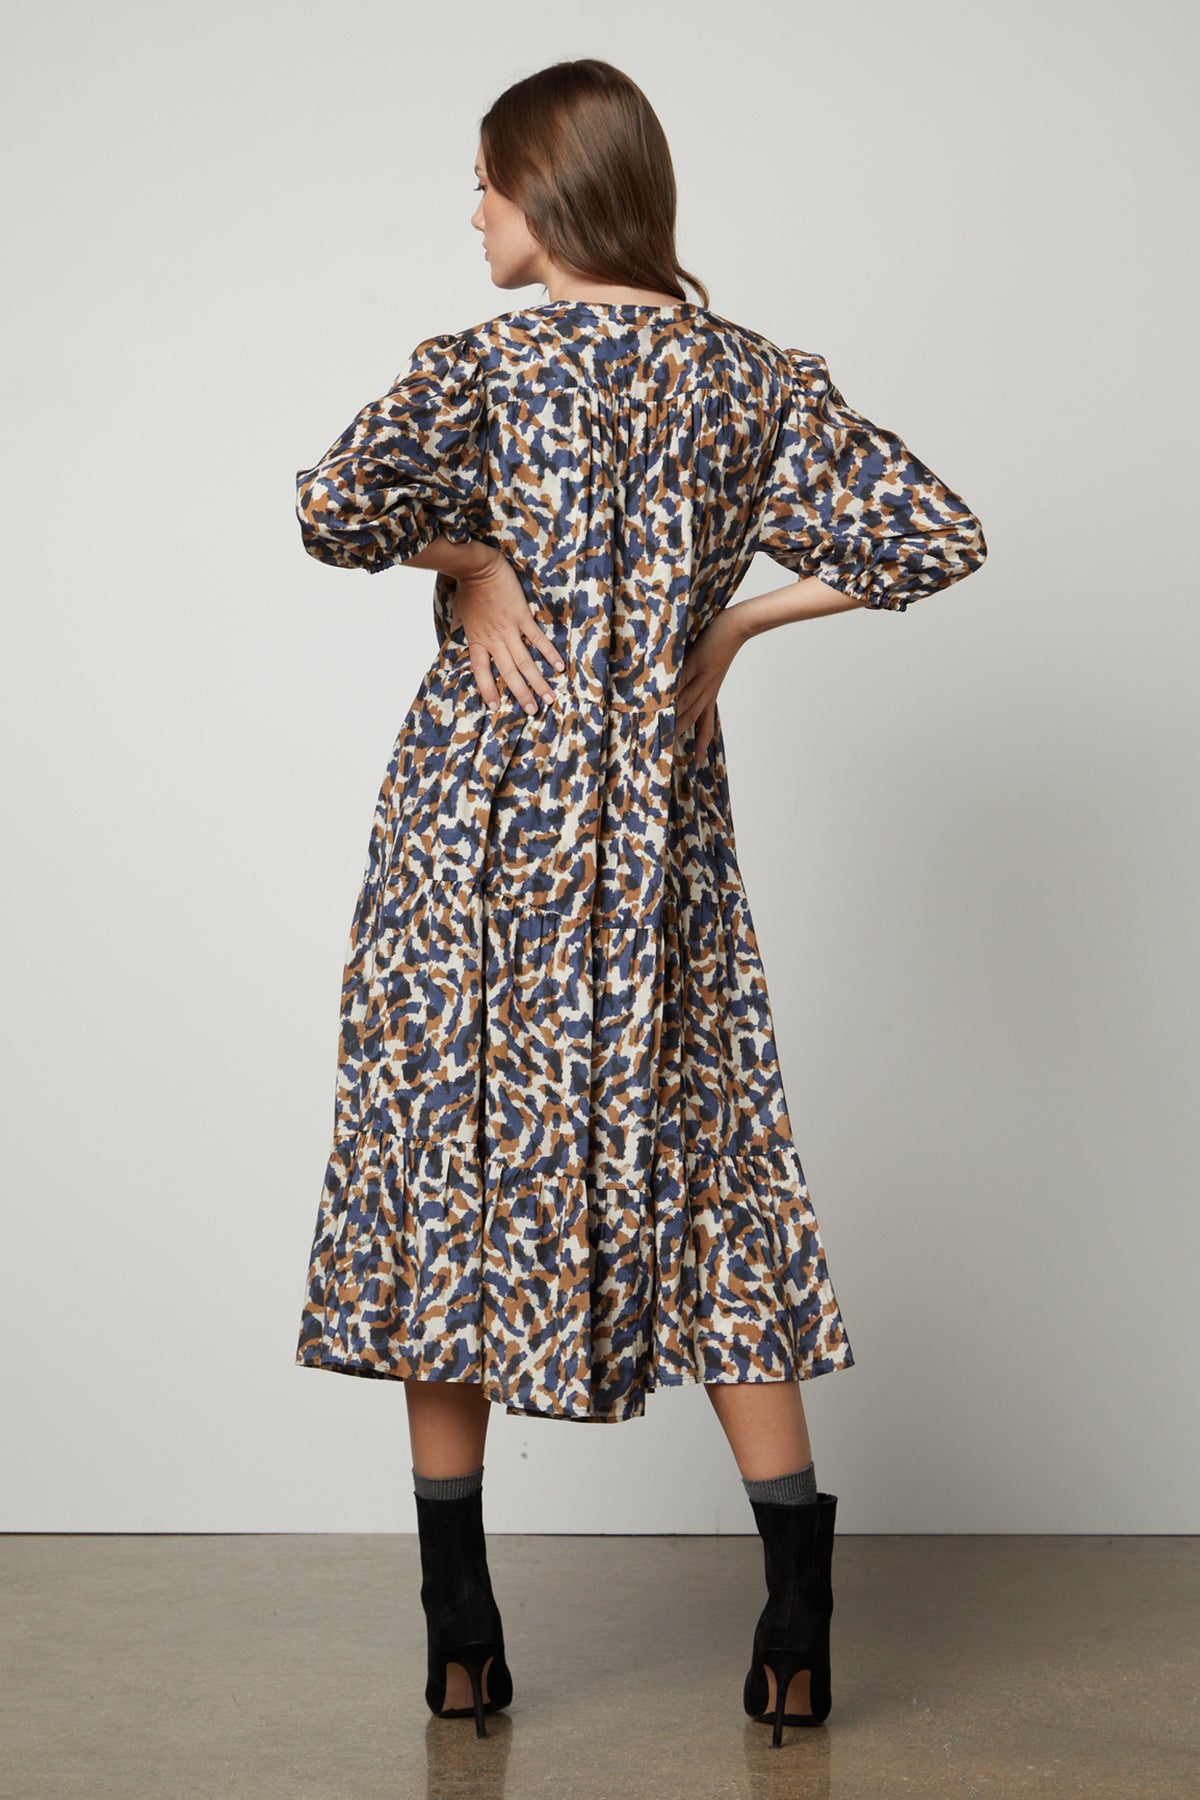 The back view of a woman wearing Velvet by Graham & Spencer's OTTILIE PRINTED BOHO DRESS with elastic cuffs.-26914793717953